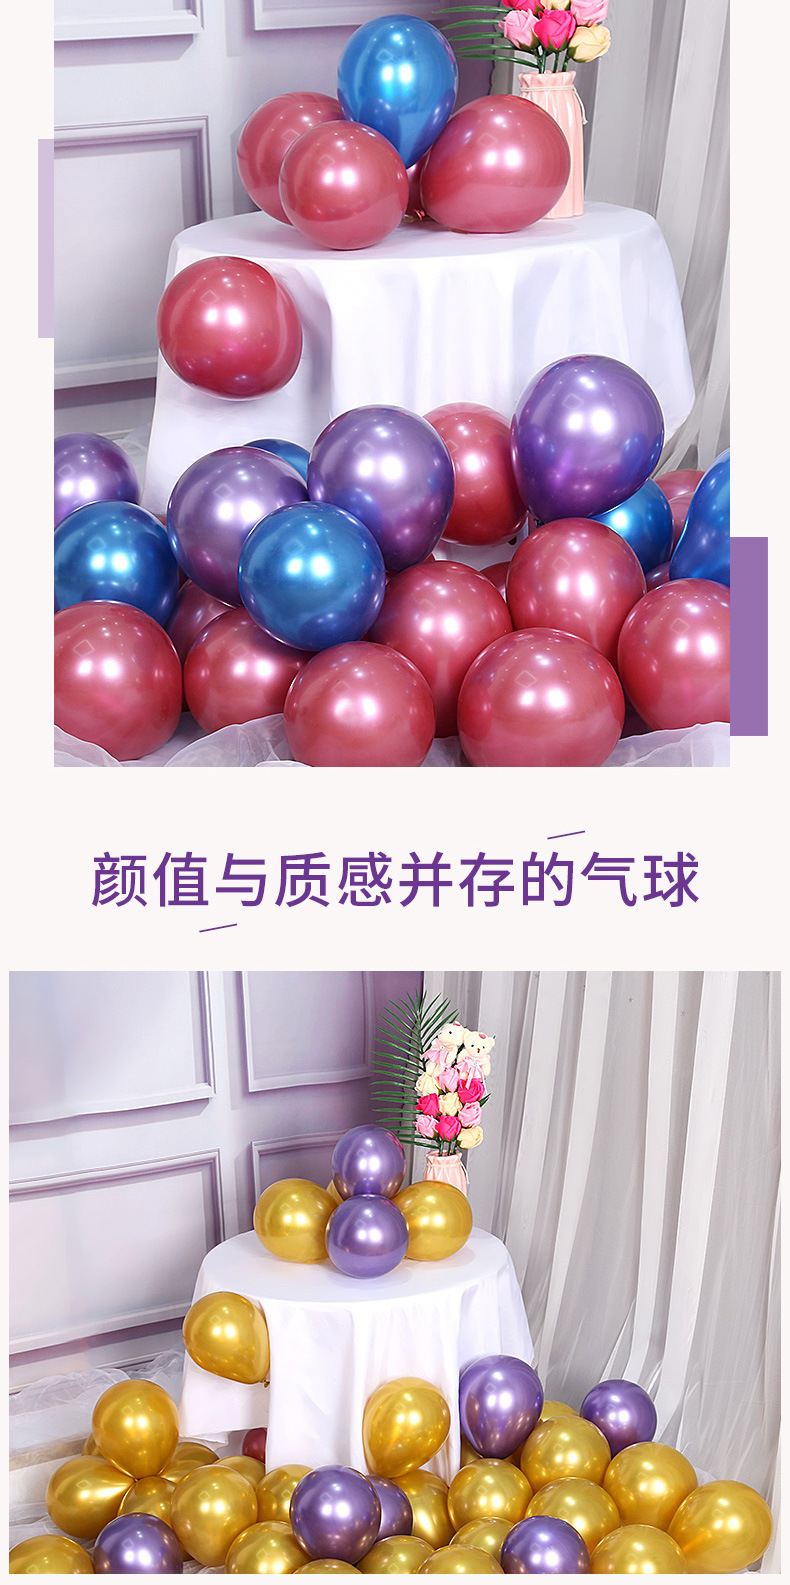 Air Floating Round Latex Balloon Decoration Party Layout 5 Inch Metal Balloon display picture 7